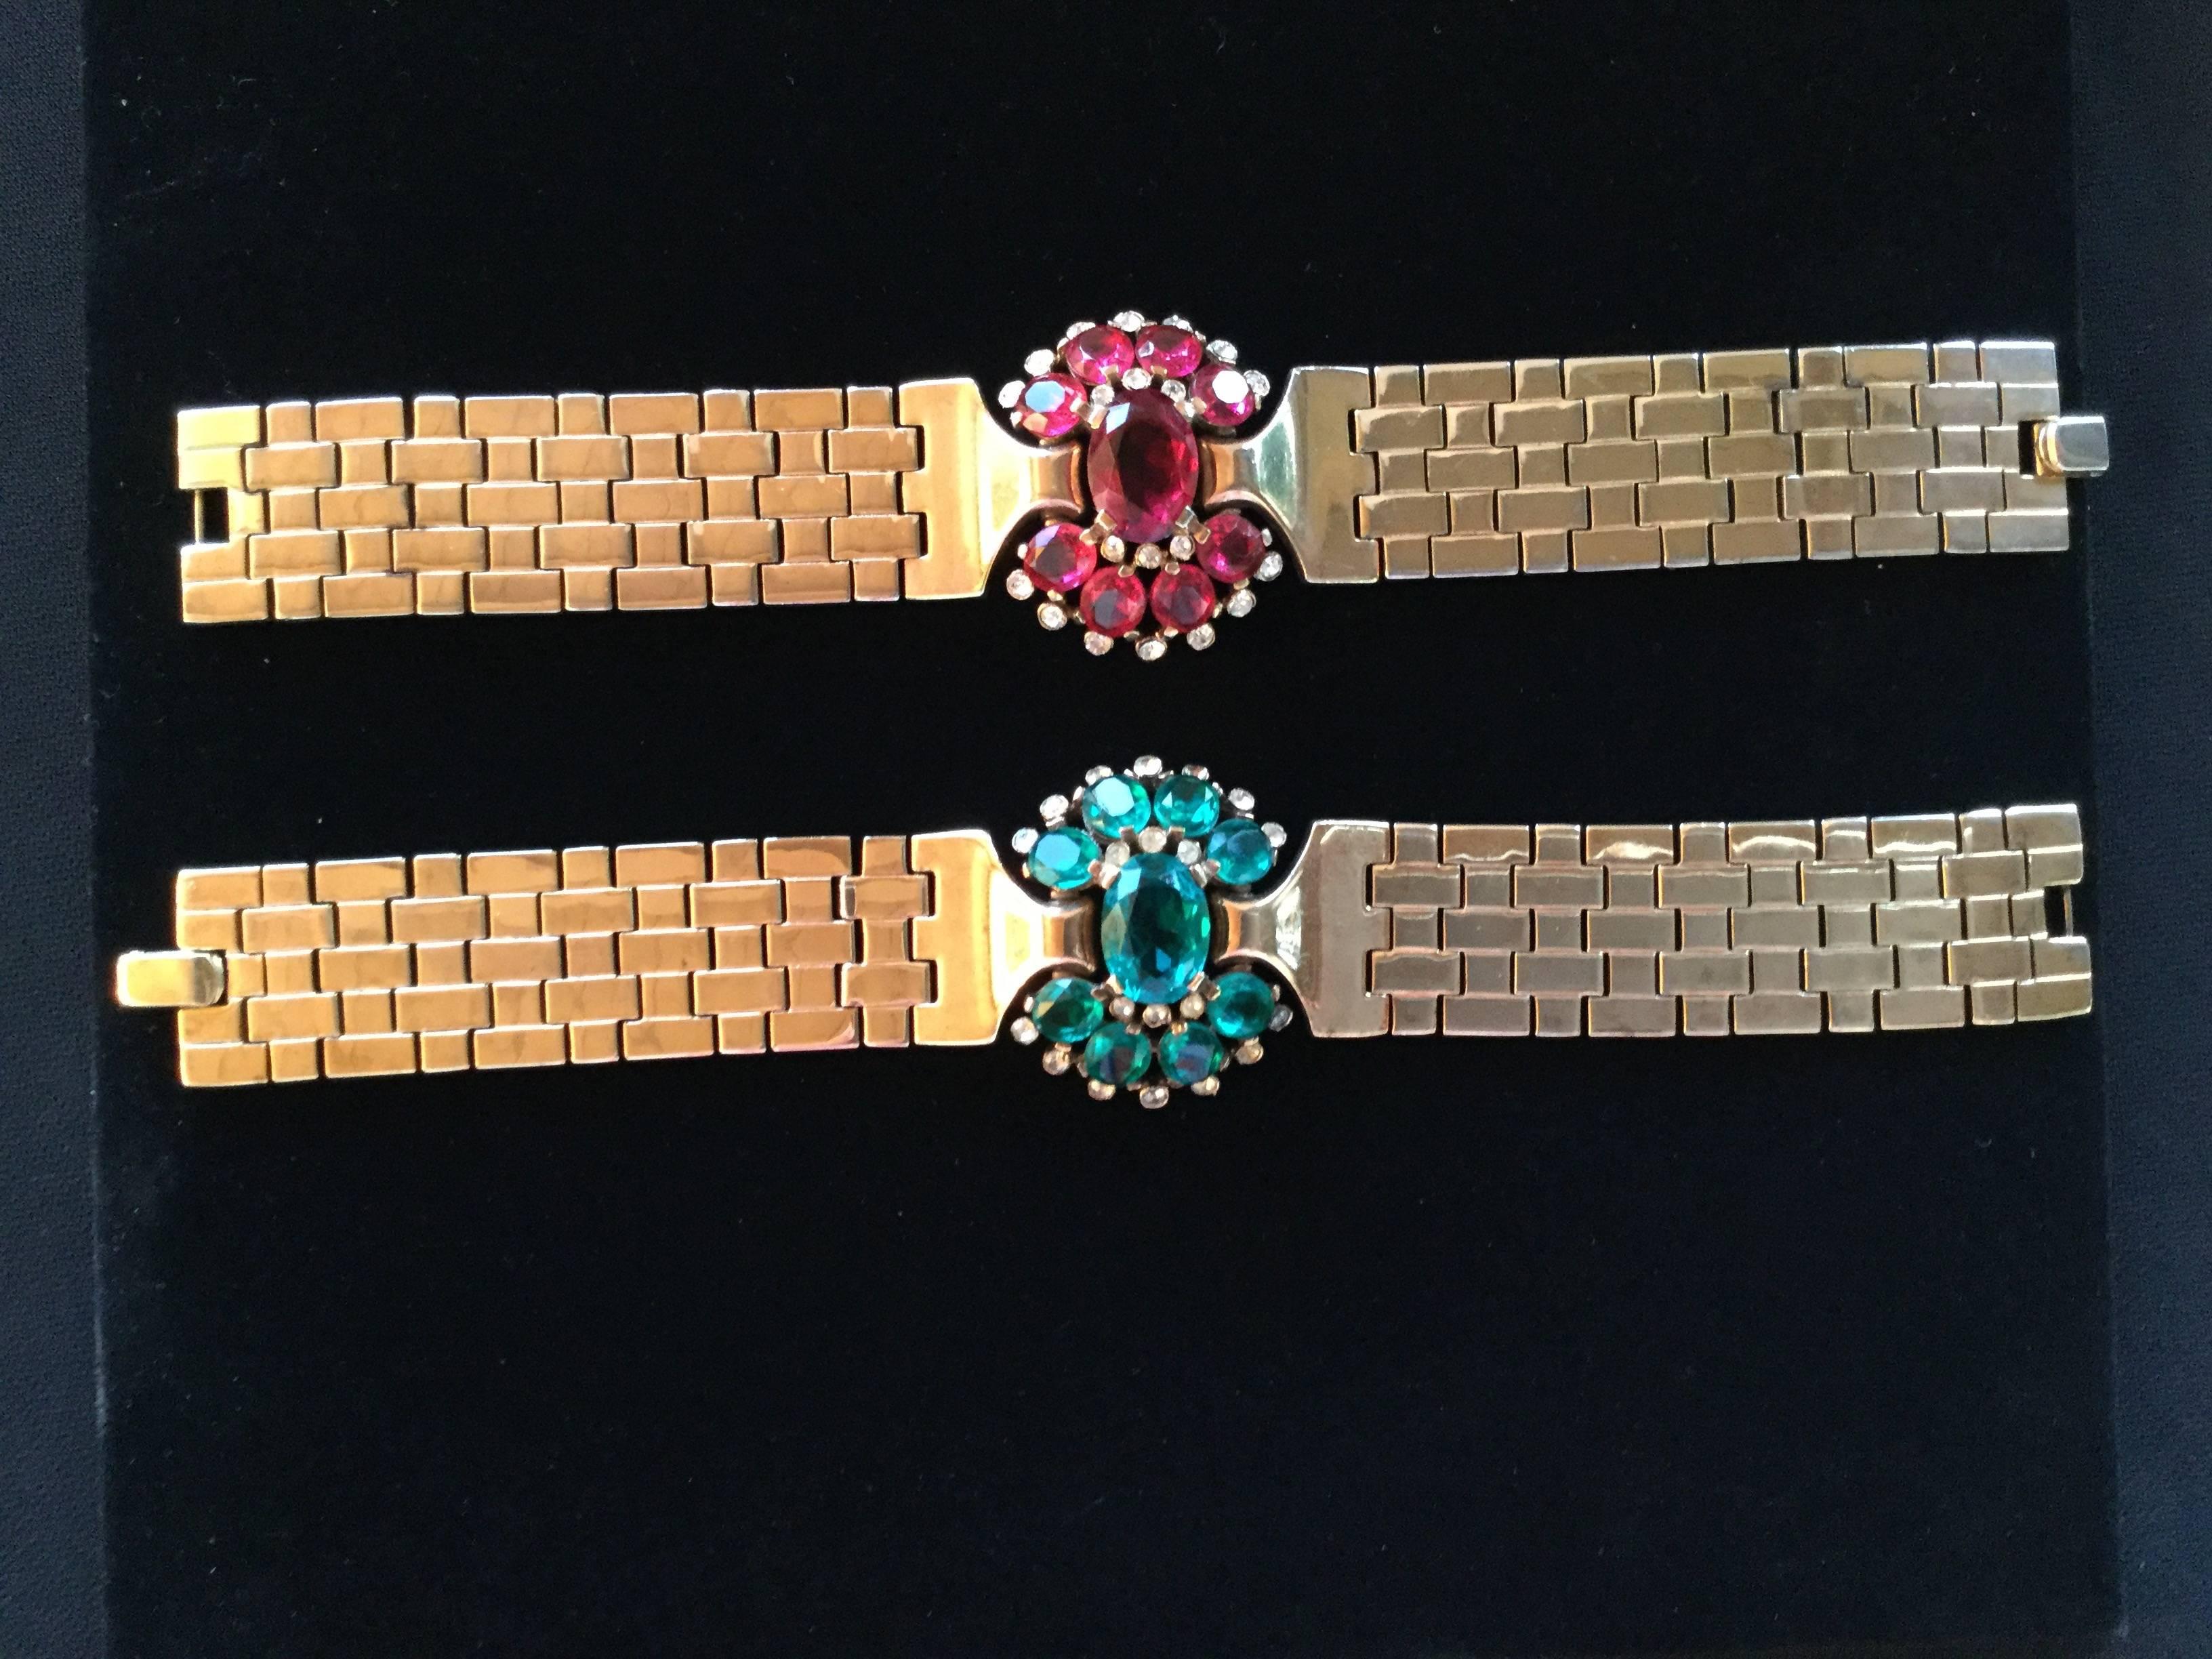 A pair of large scale Retro Moderne style bracelets designed by Alfred Philippe. Echoing Philippe's earlier work for Cartier and Van Cleef, these channel the feeling of the dramatic precious cocktail jewels so beloved by 1940's movie stars during